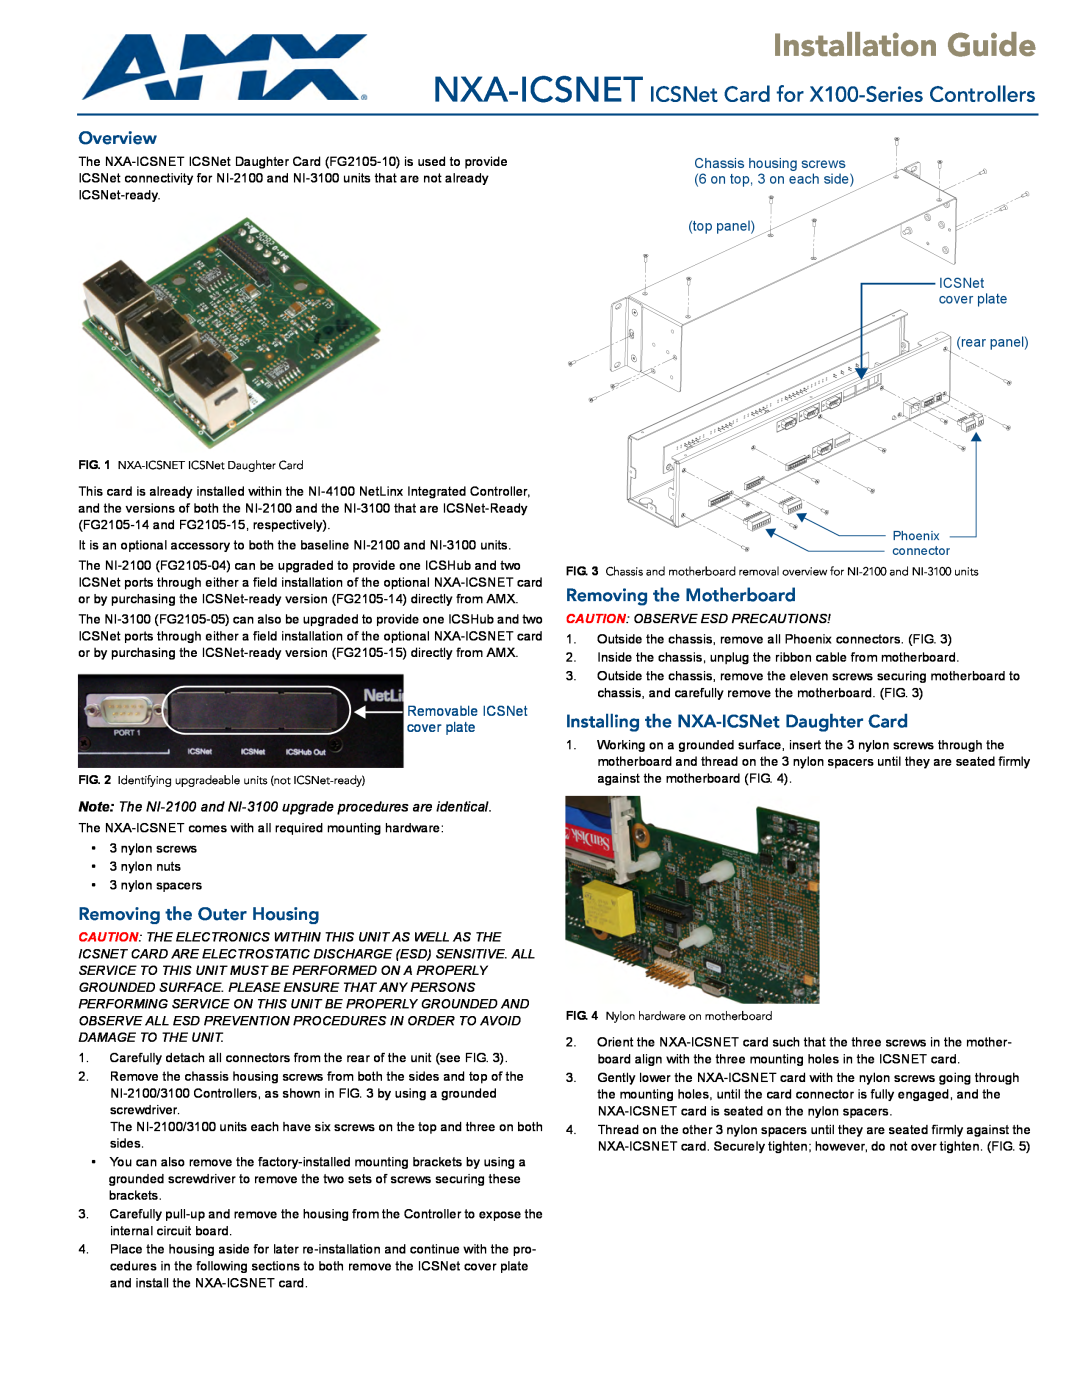 AMX NXA-ICSNET manual Overview, Removing the Outer Housing, Removing the Motherboard, ICSNet cover plate, rear panel 